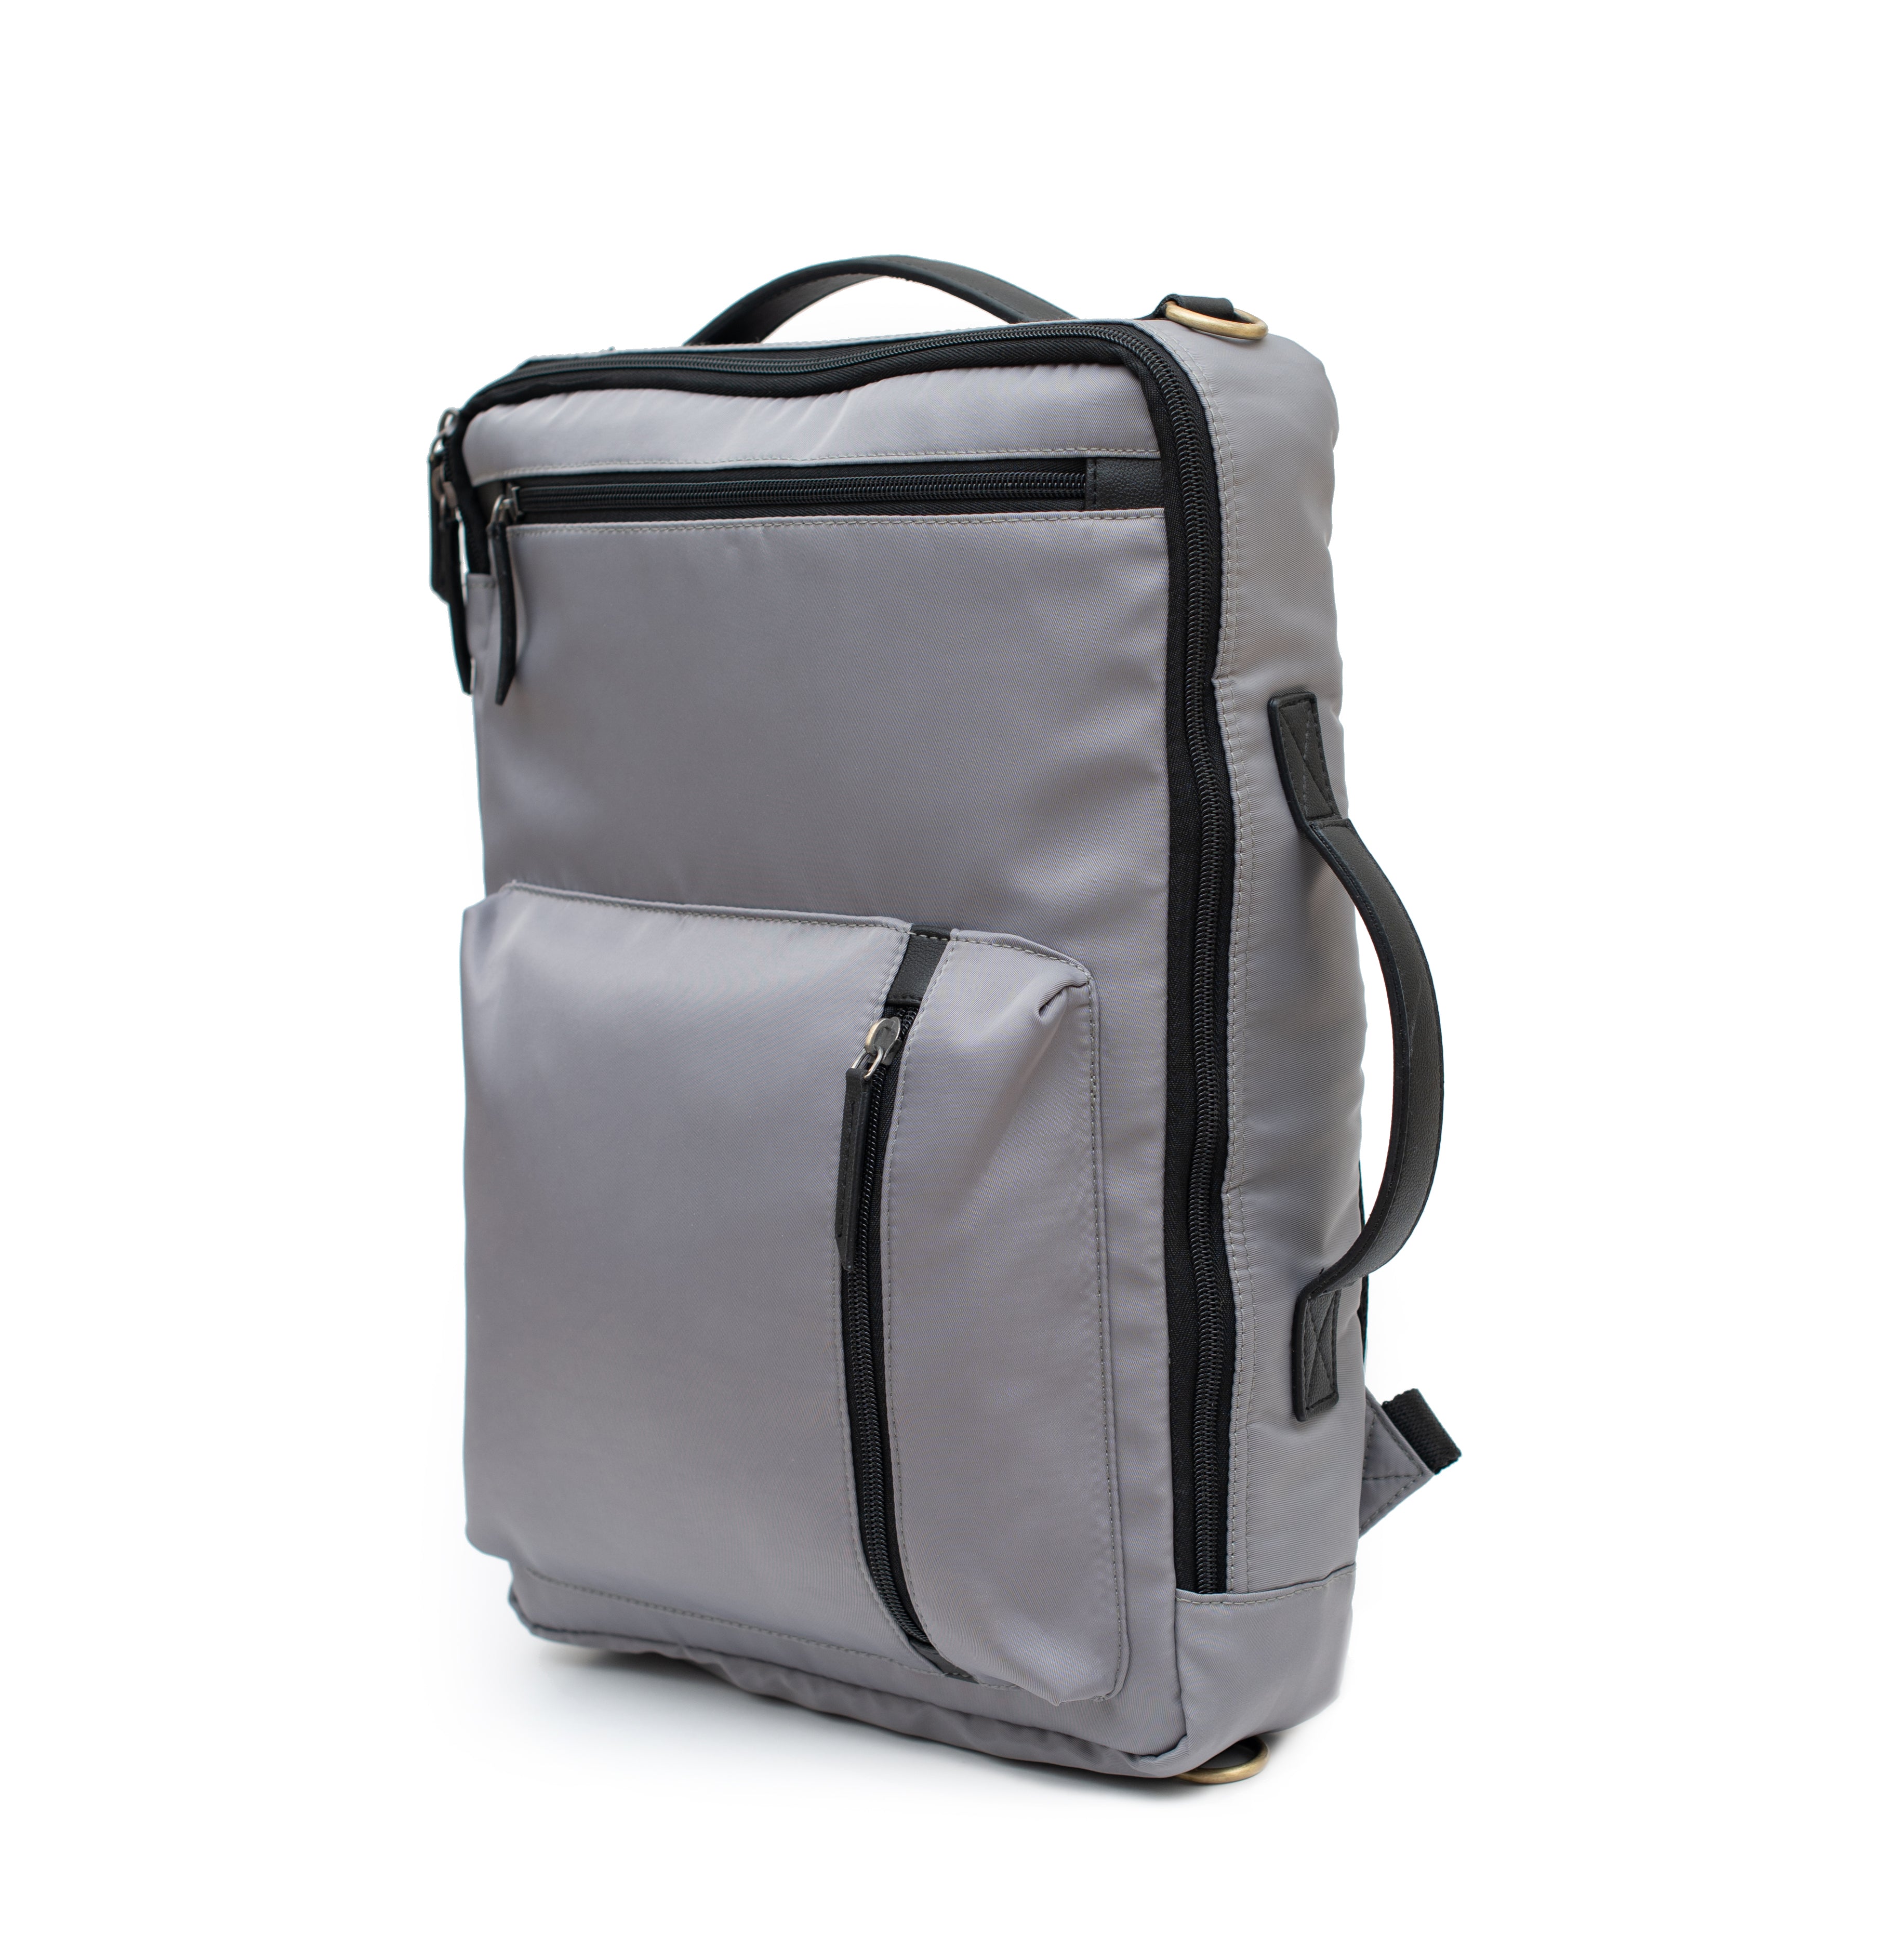 Overnighter Laptop Backpack - Falcon